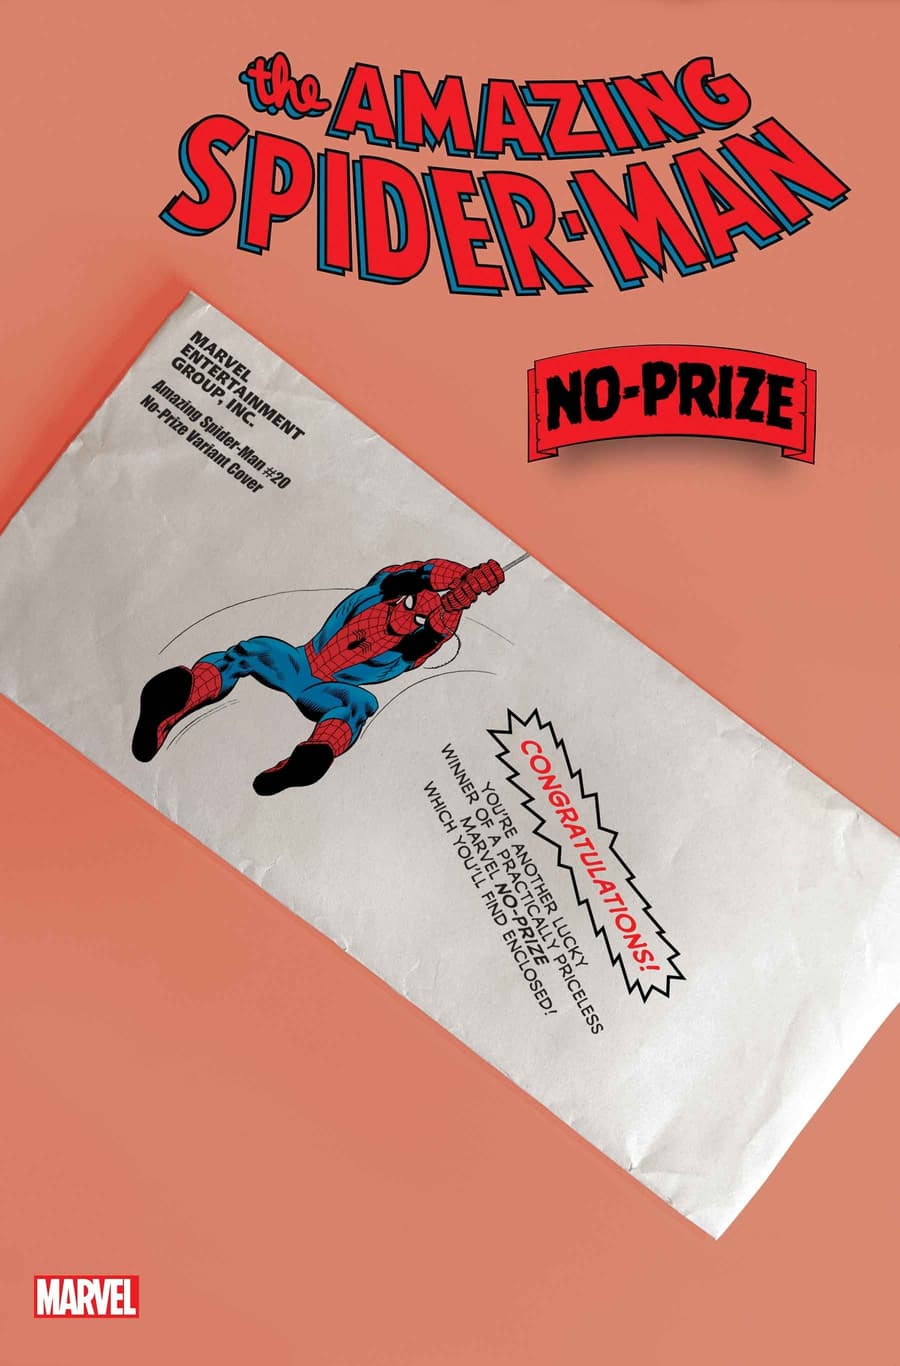 “No-Prize” variant cover to THE AMAZING SPIDER-MAN (2022) #19.